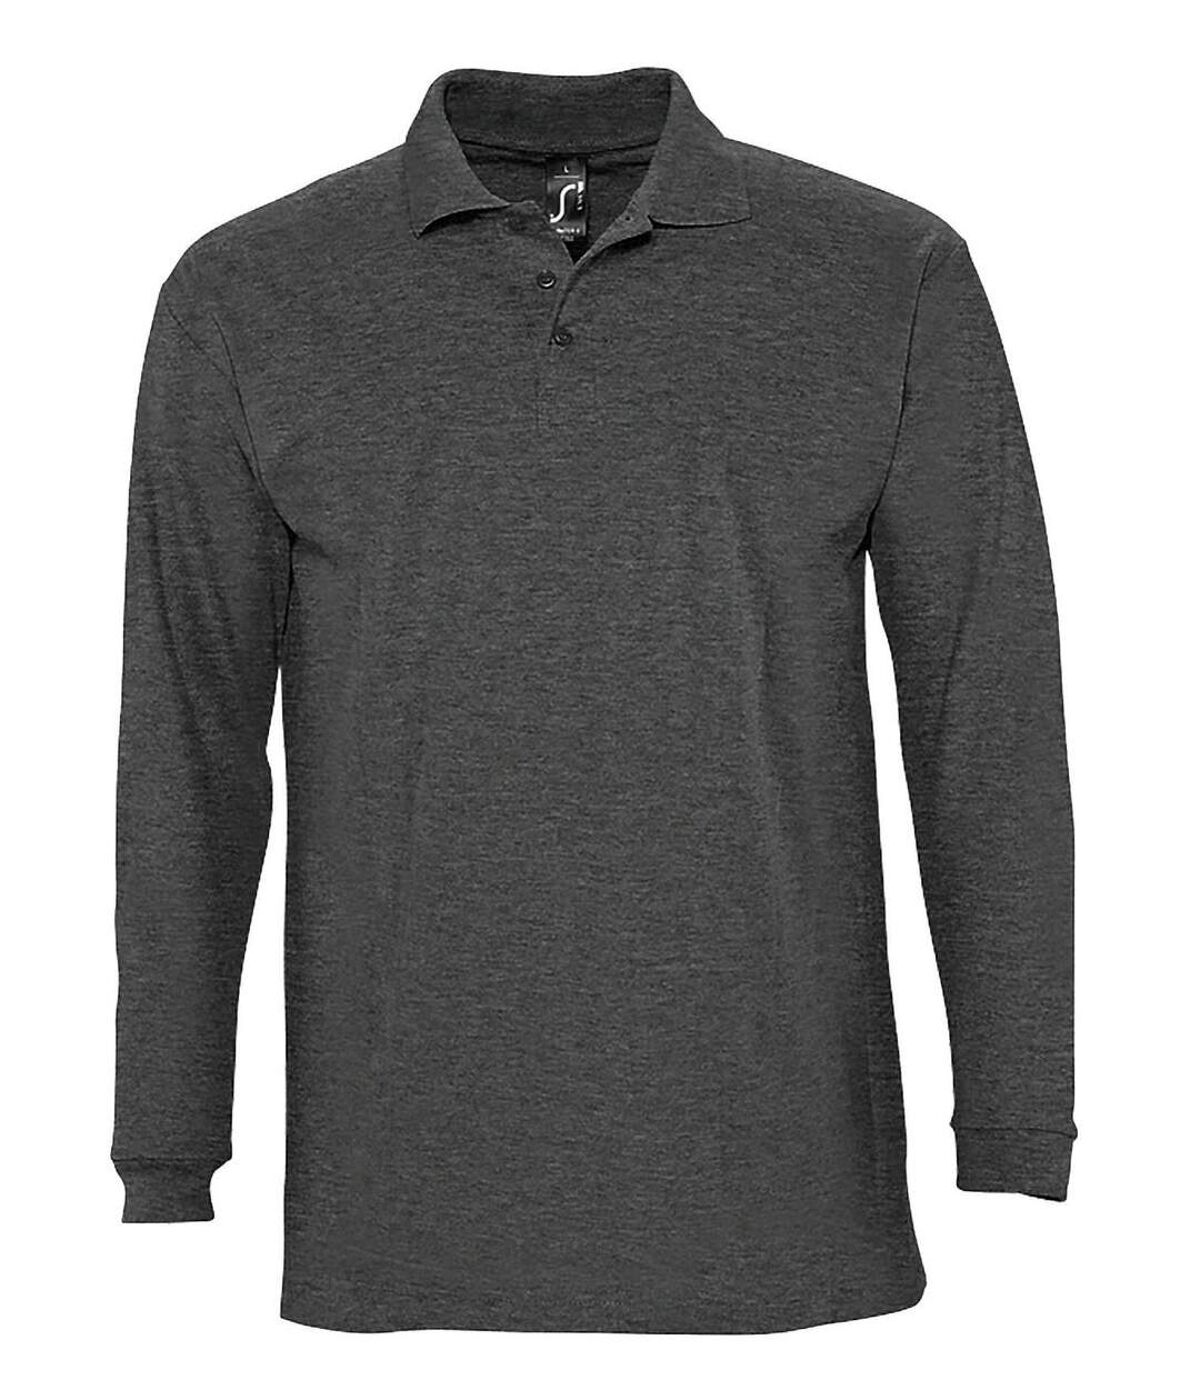 Polo manches longues - Homme - 11353 - gris anthracite chiné